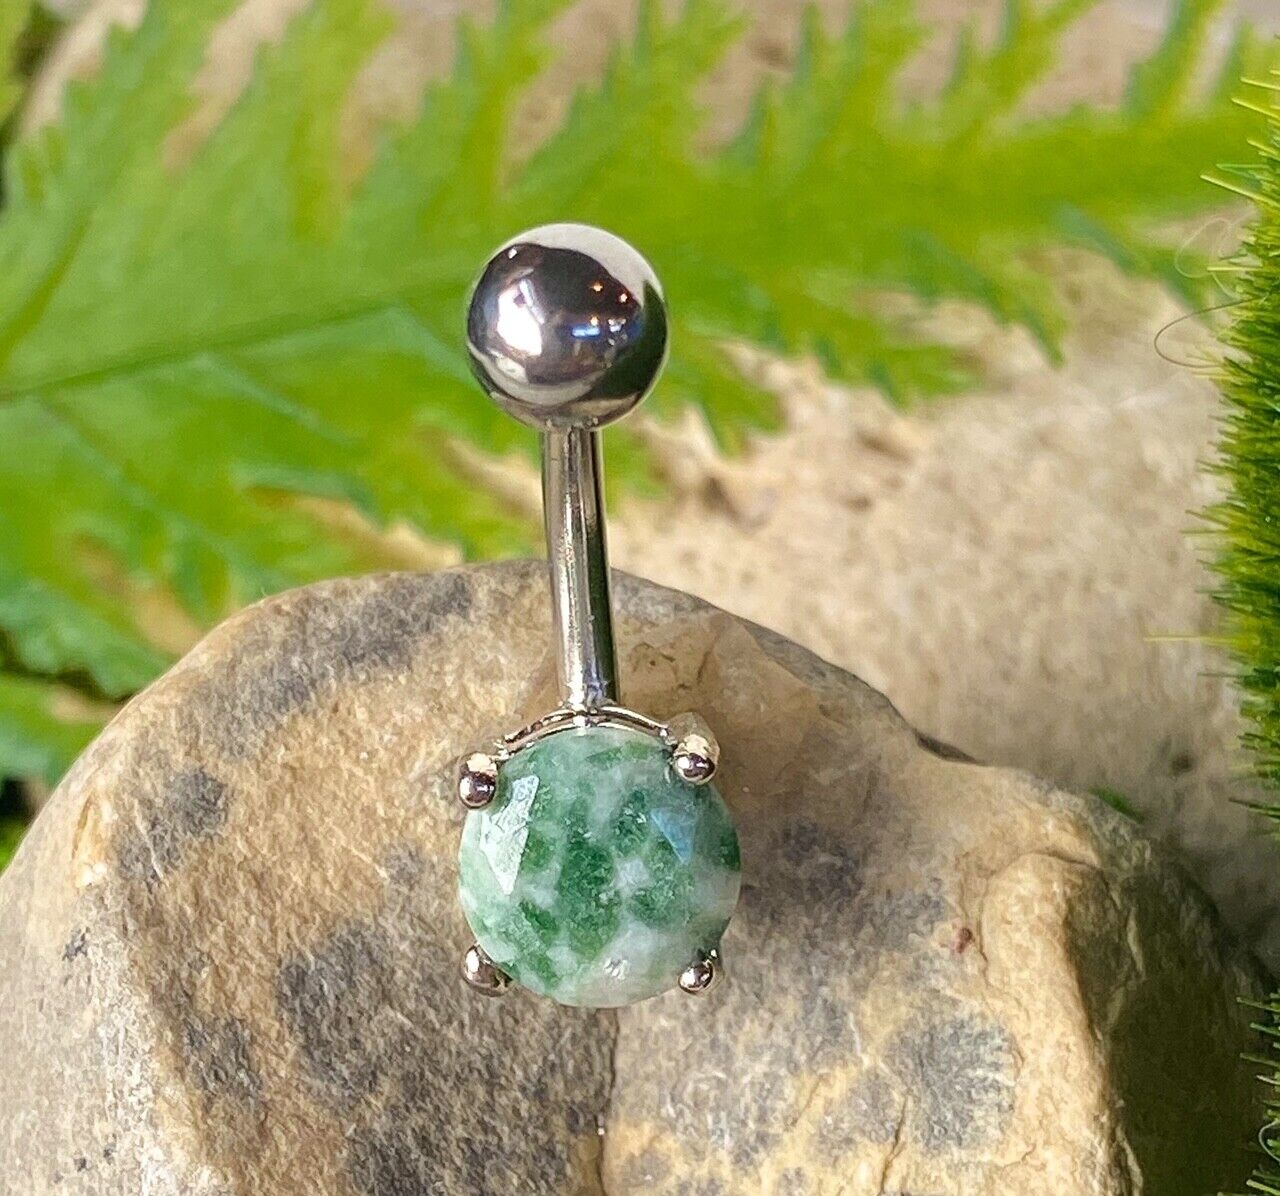 Solitaire Semi-Precious Belly Ring Natural Stone Pierced Navel Naval 14g Prong